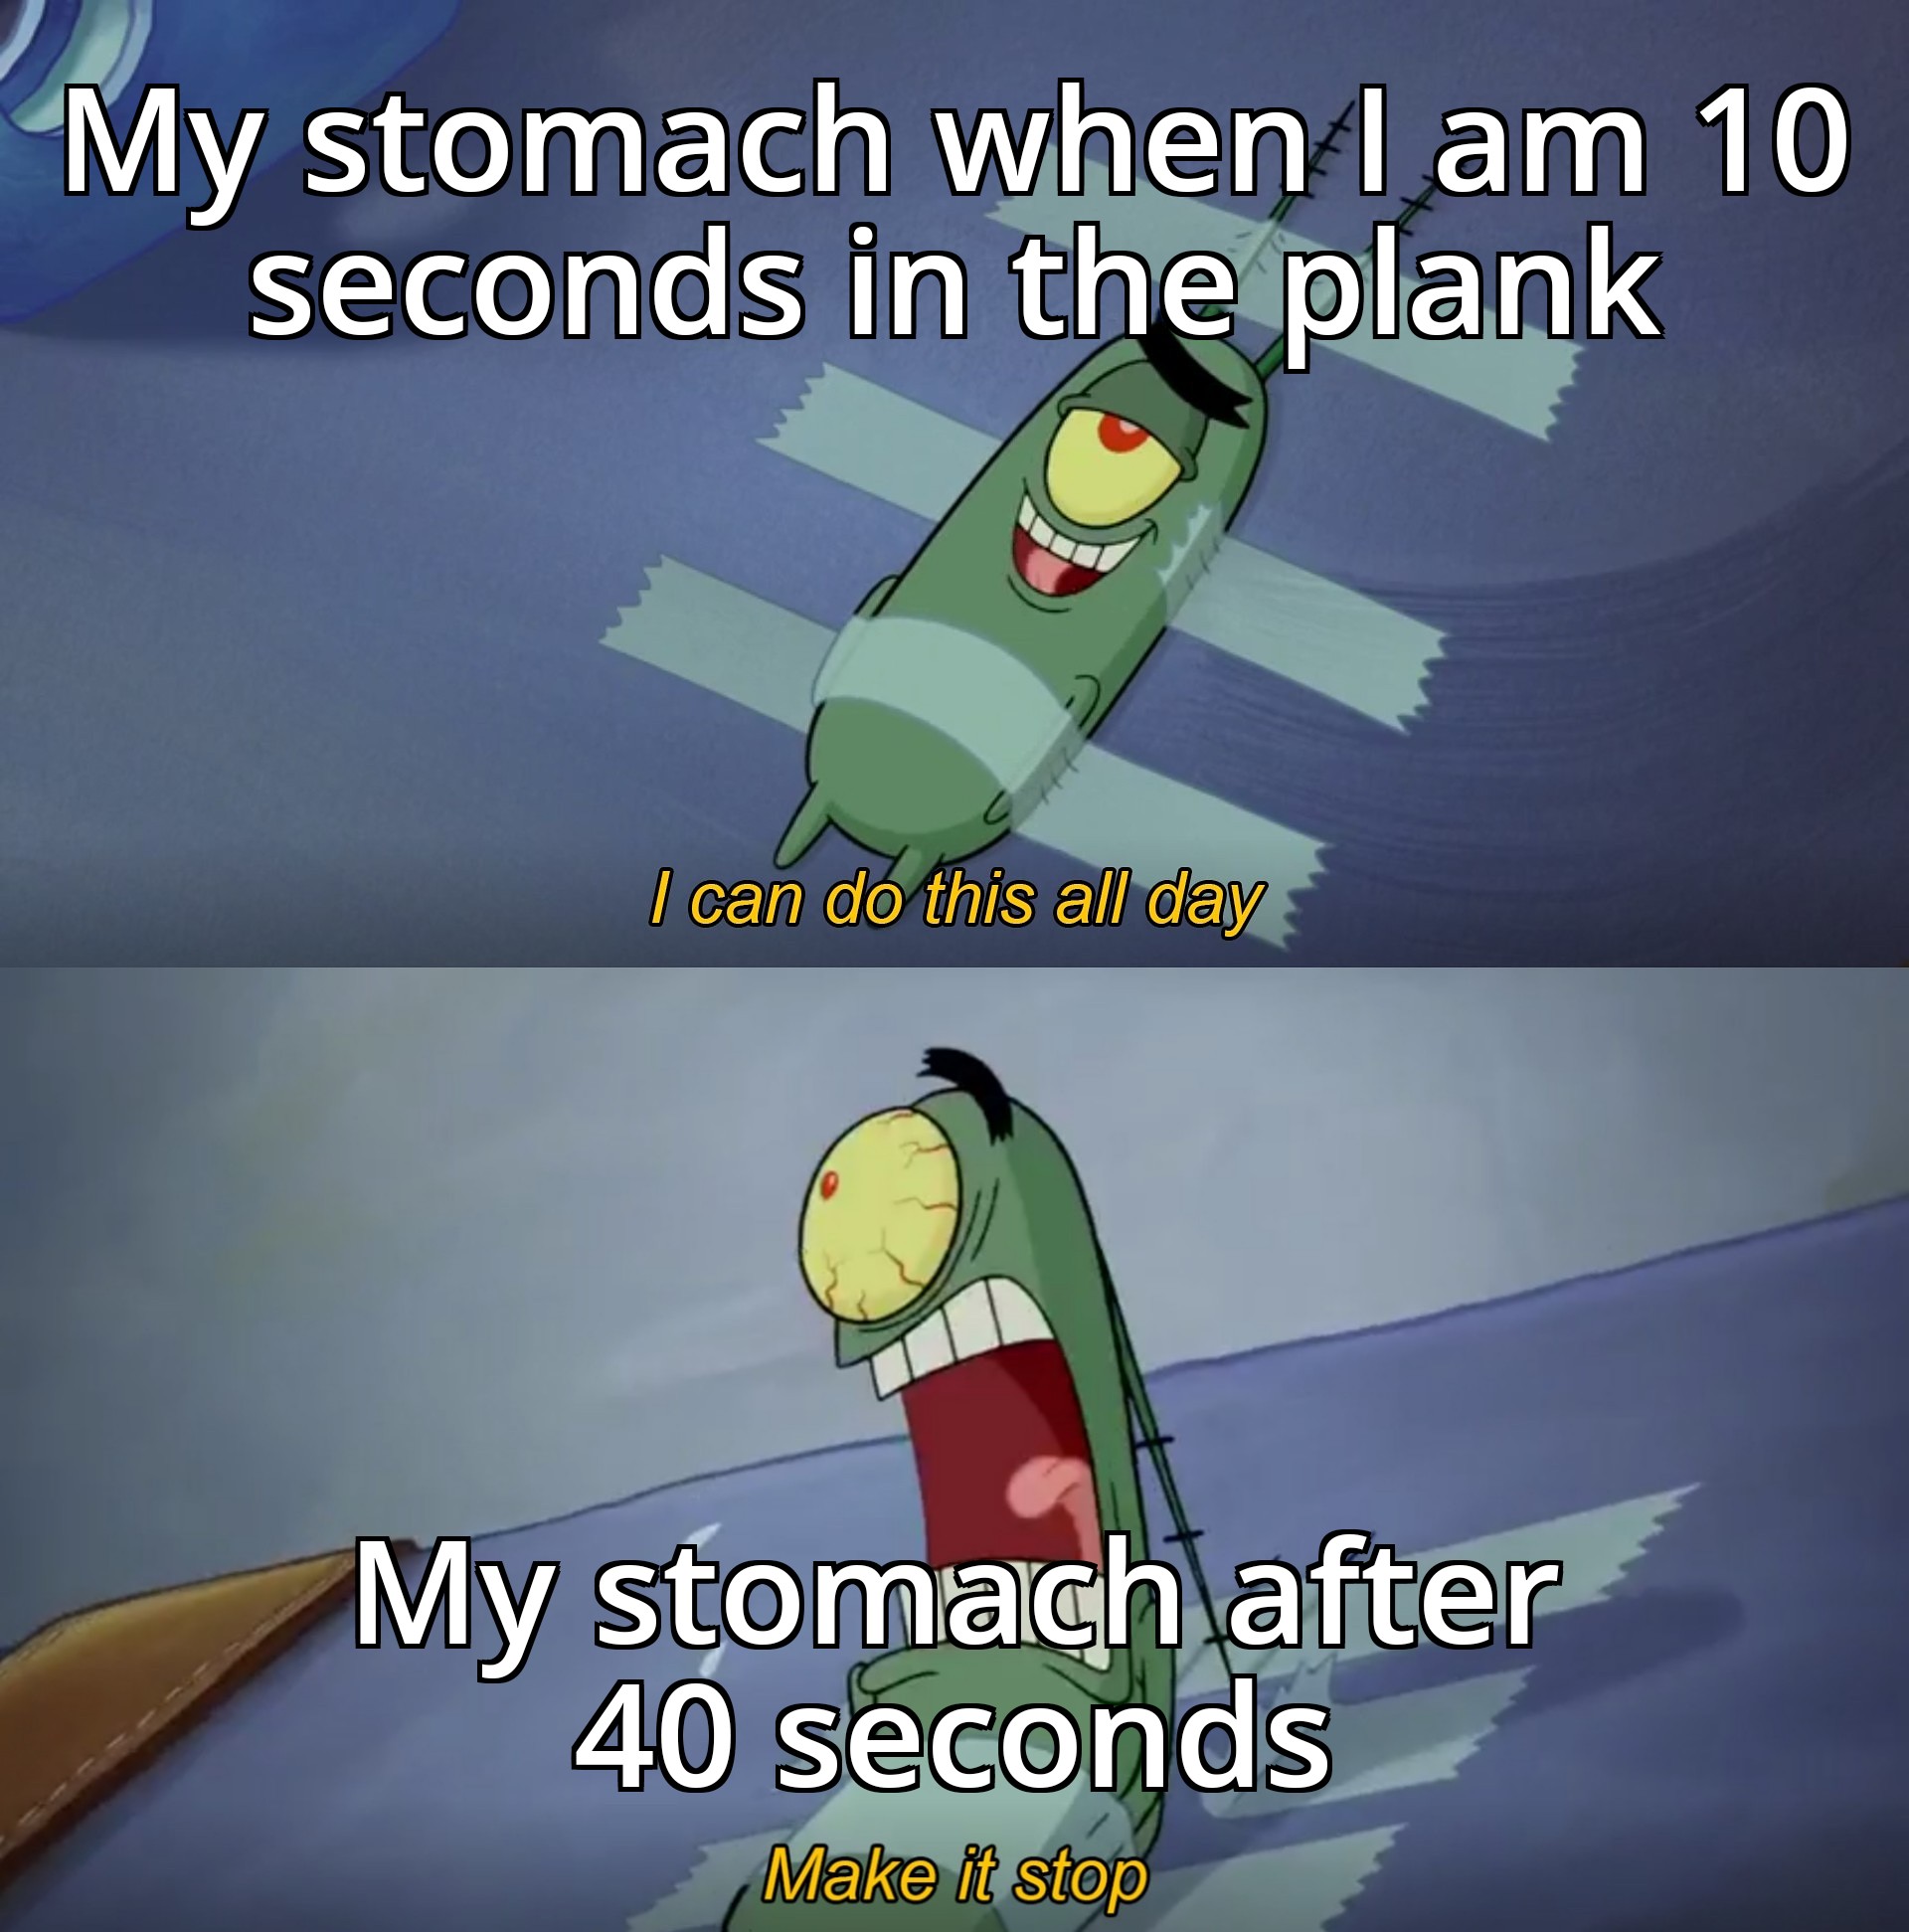 dank memes - could do this all day meme spongebob - My stomach when I am 10 seconds in the plank I can do this all day My stomach after 40 seconds Make it stop